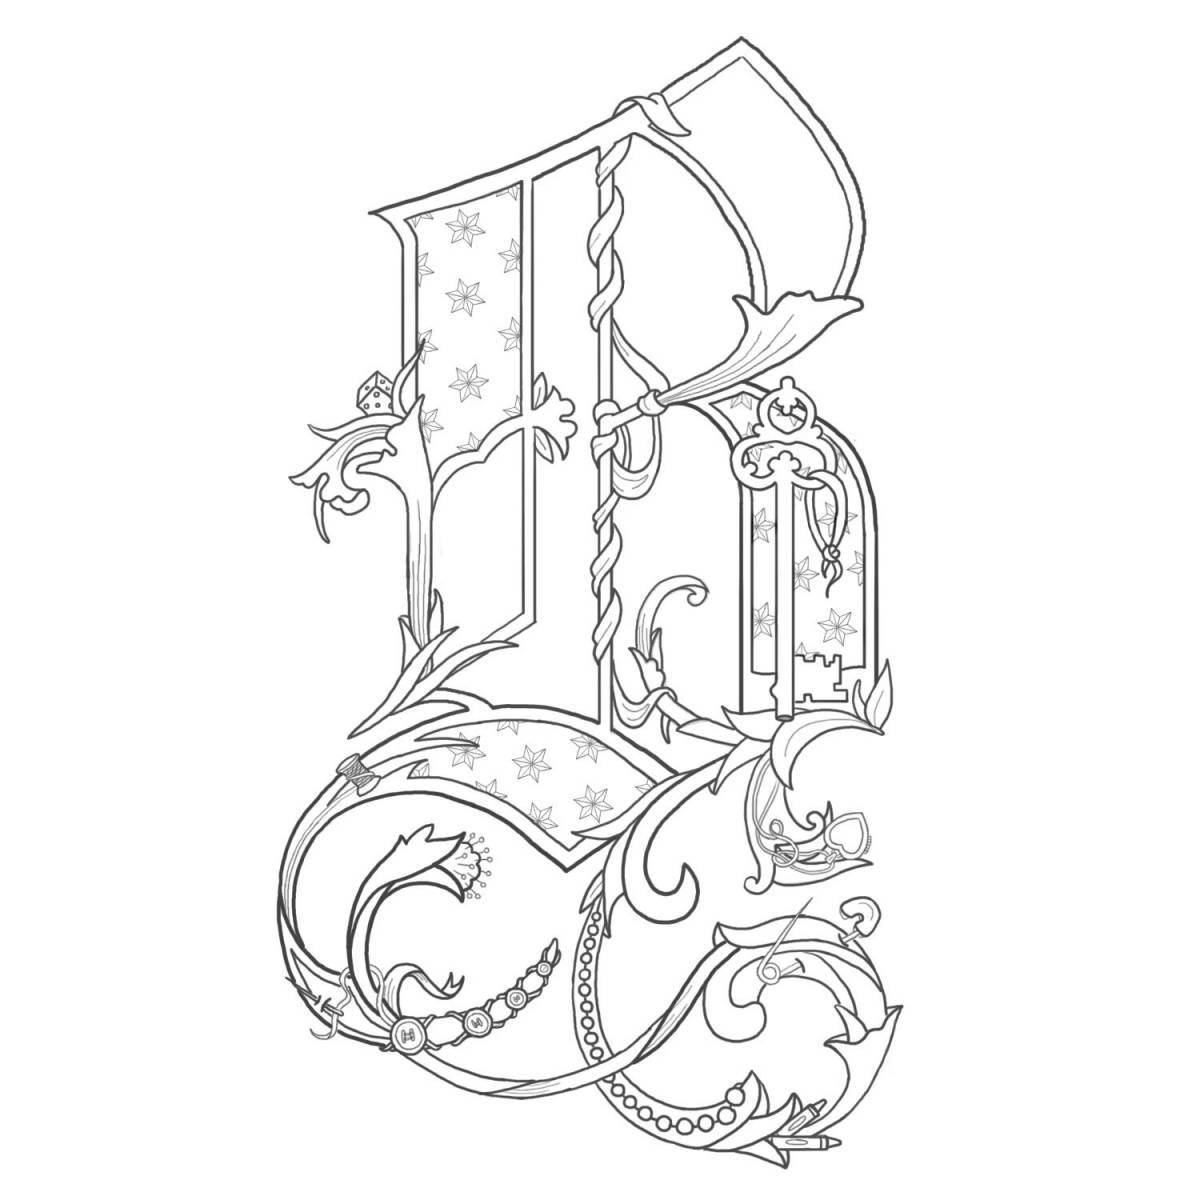 Shine letter in splendid coloring page